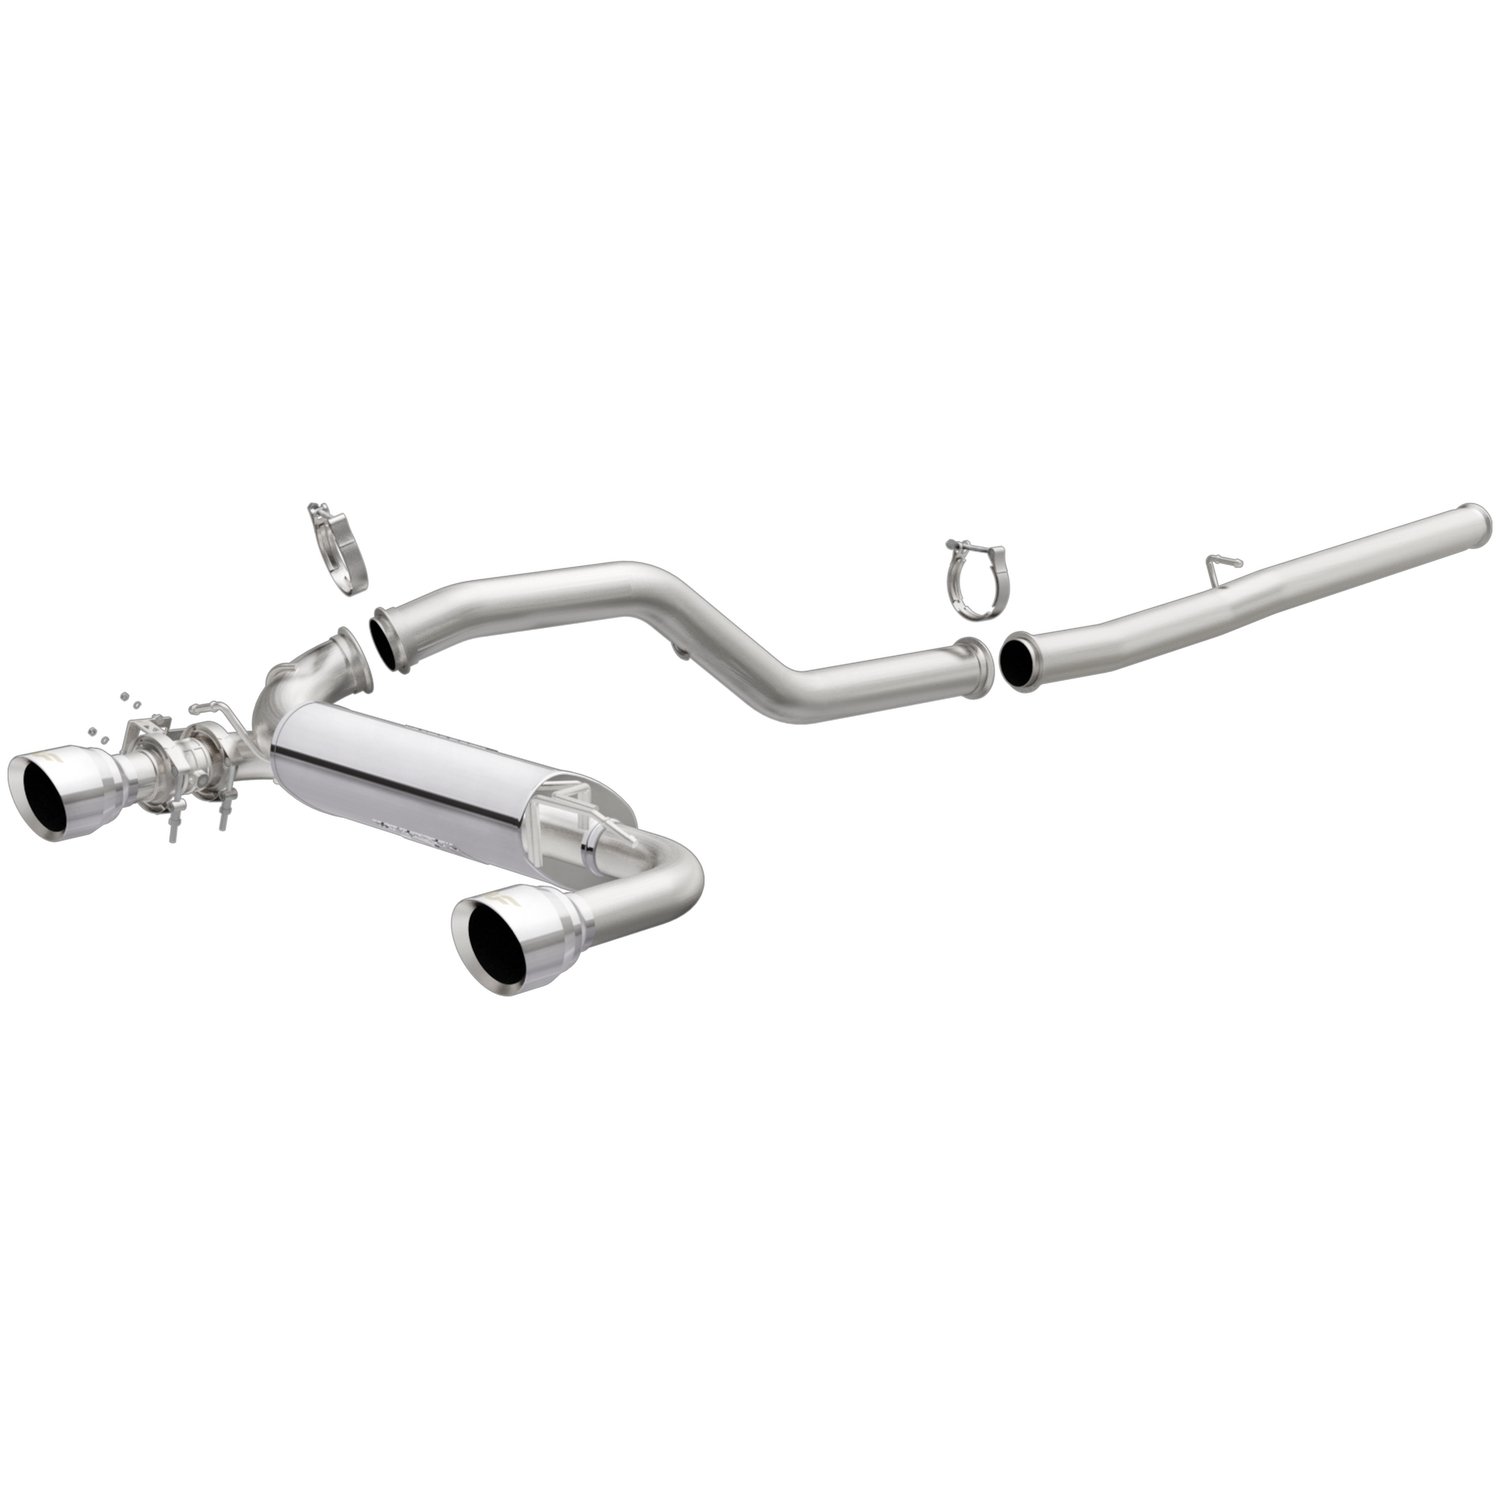 2016-2018 Ford Focus Race Series Cat-Back Performance Exhaust System